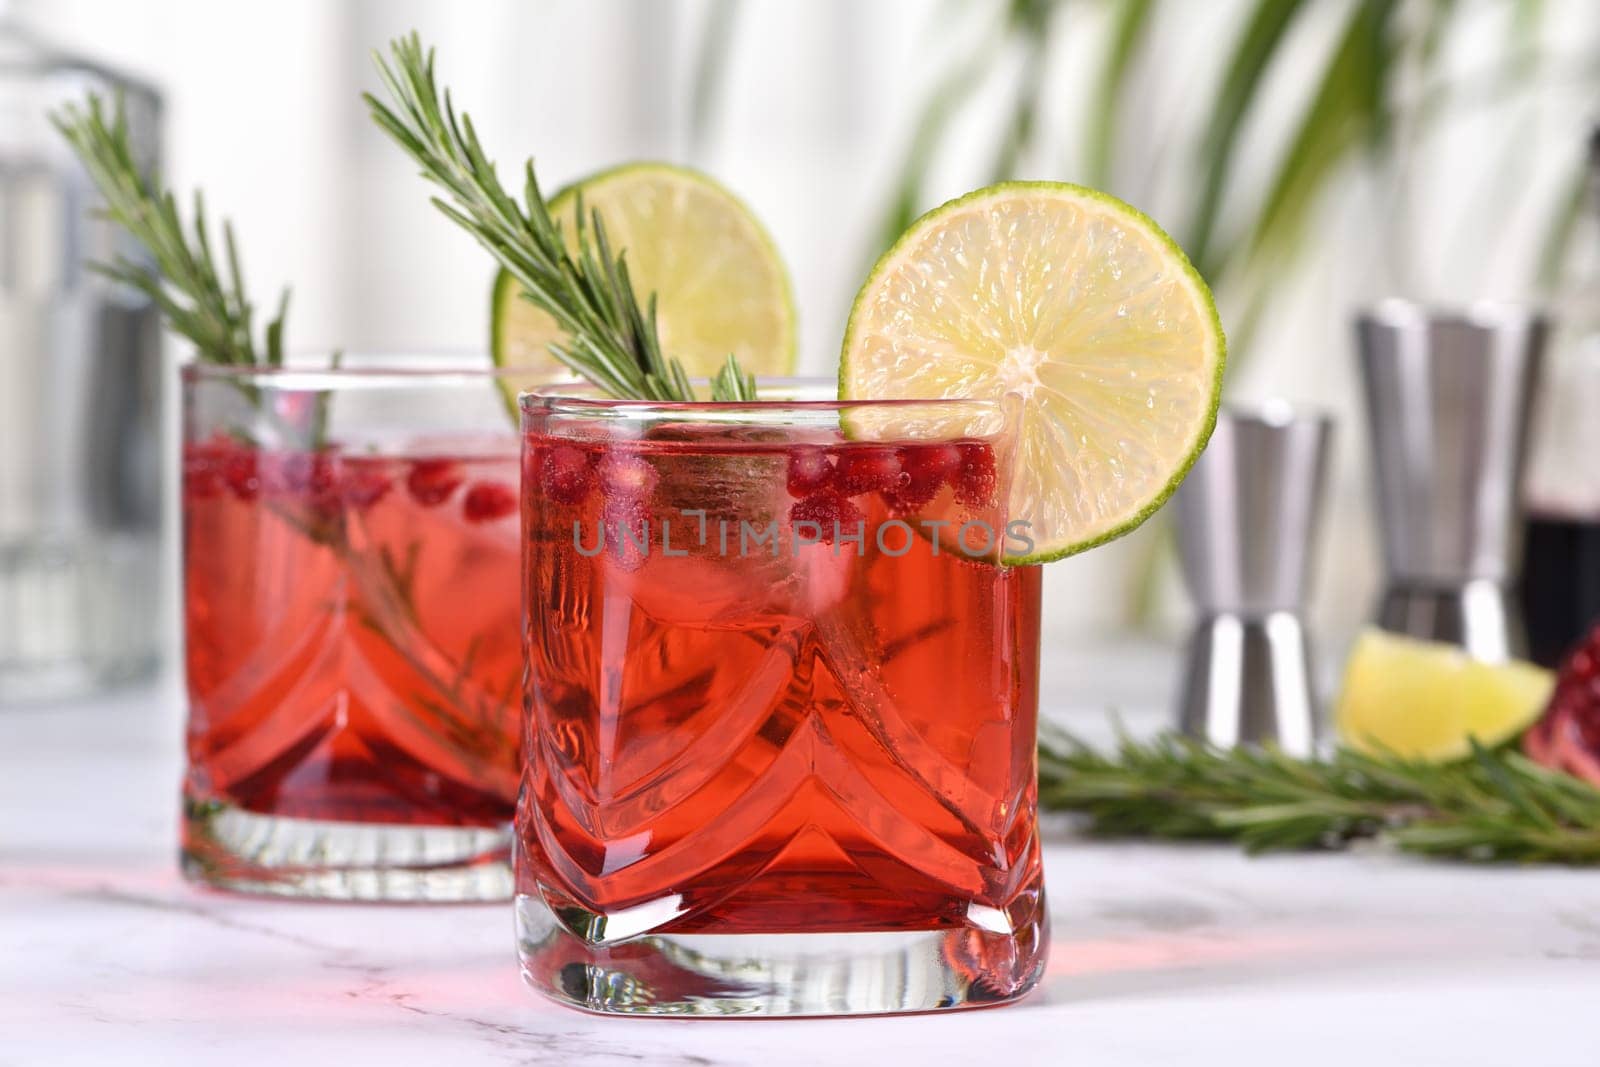 Classic cocktail Pomegranate Paloma by Apolonia